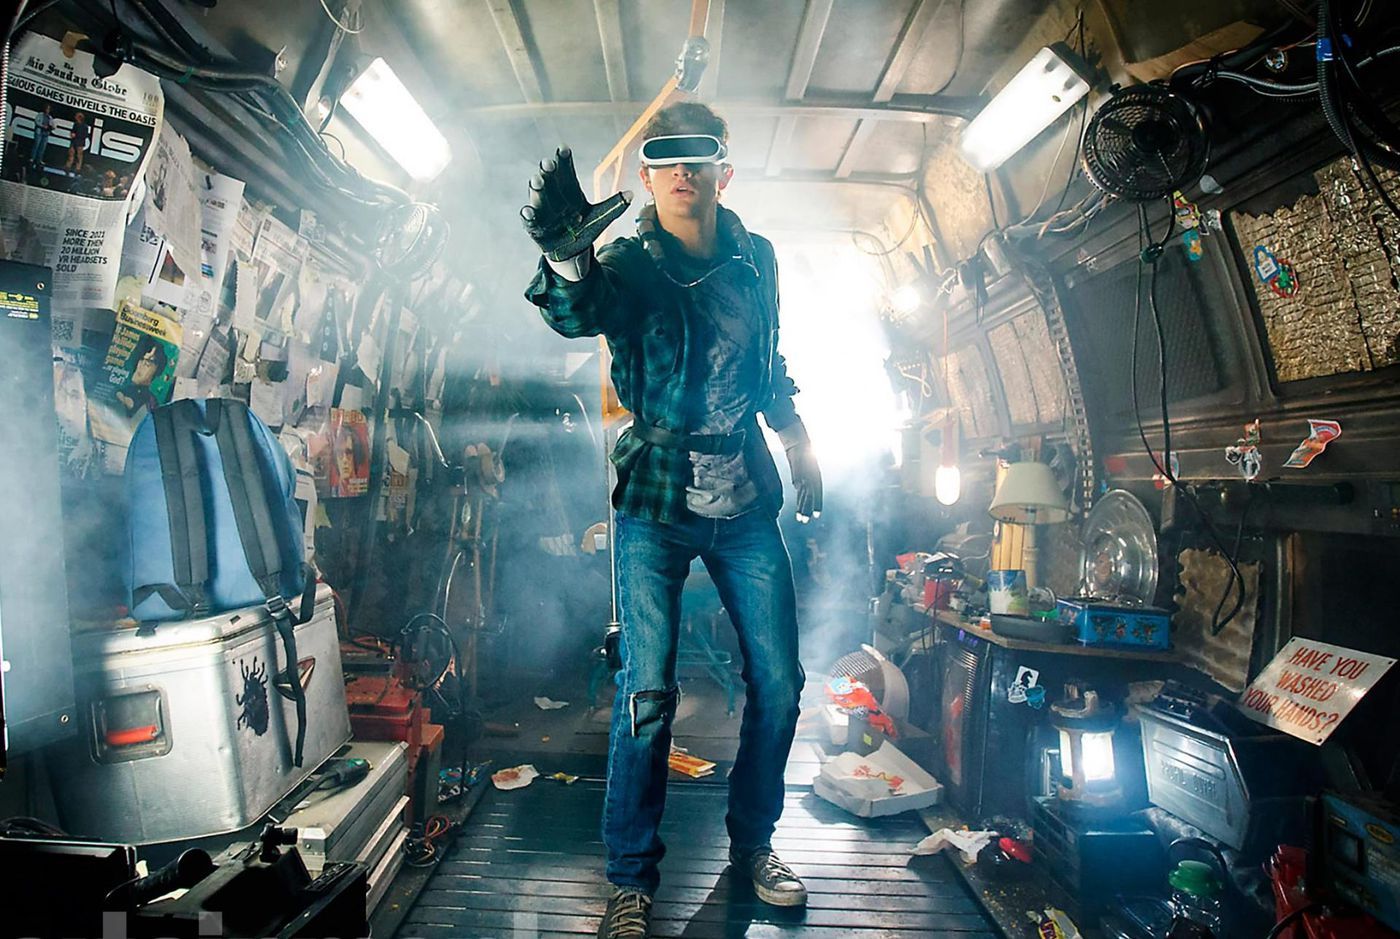 Steven Spielberg's Ready Player One improves immensely on the book